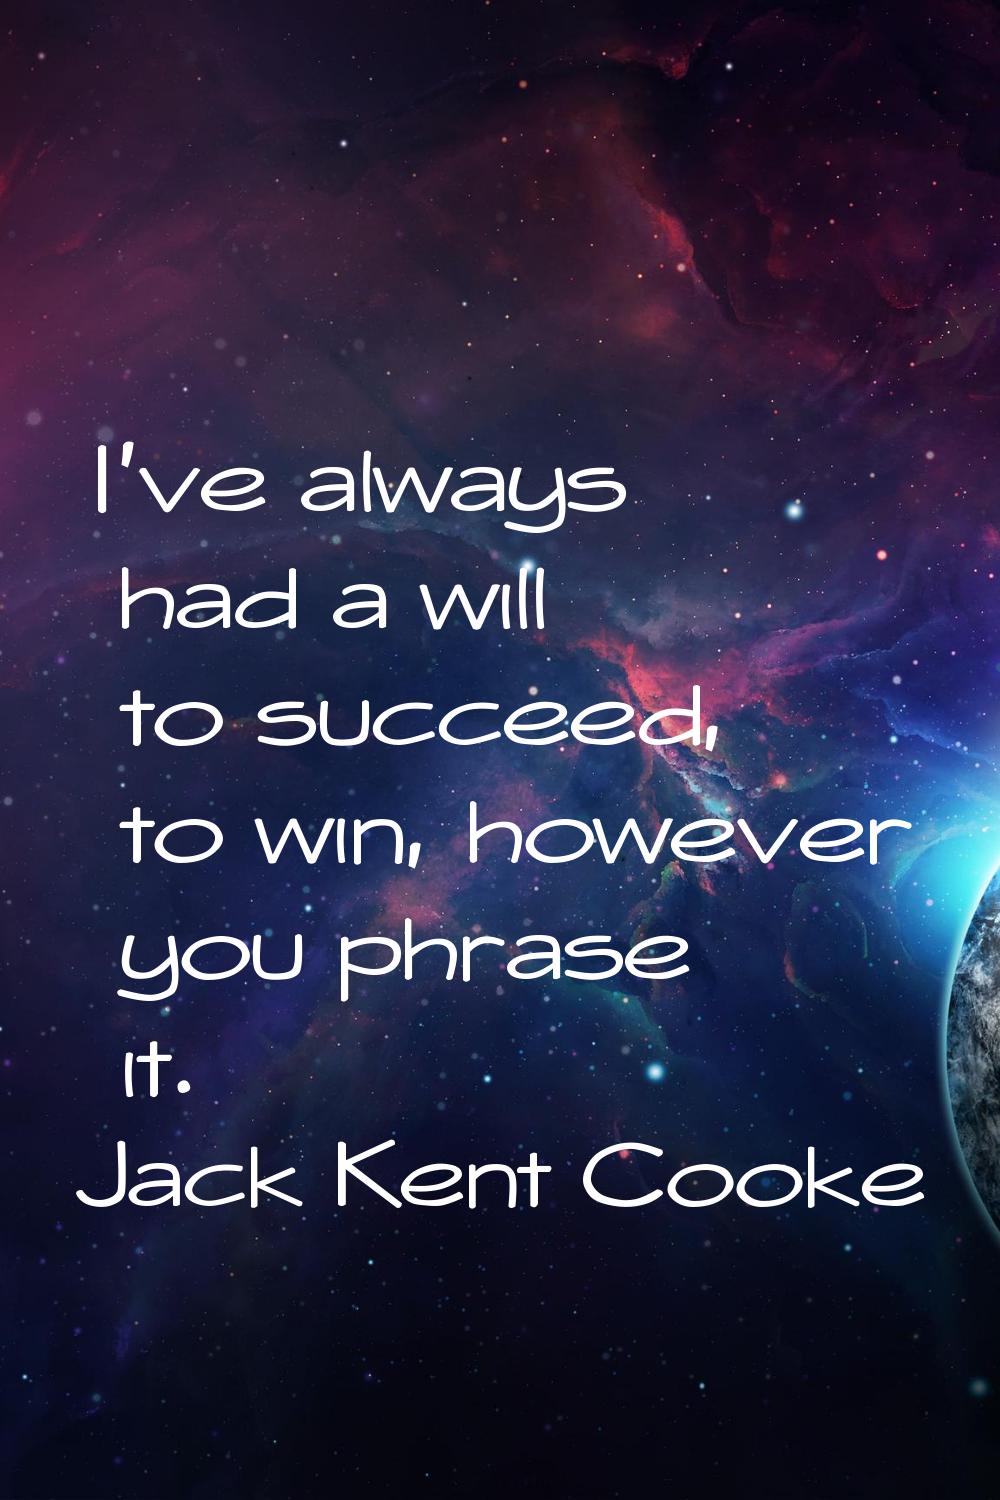 I've always had a will to succeed, to win, however you phrase it.